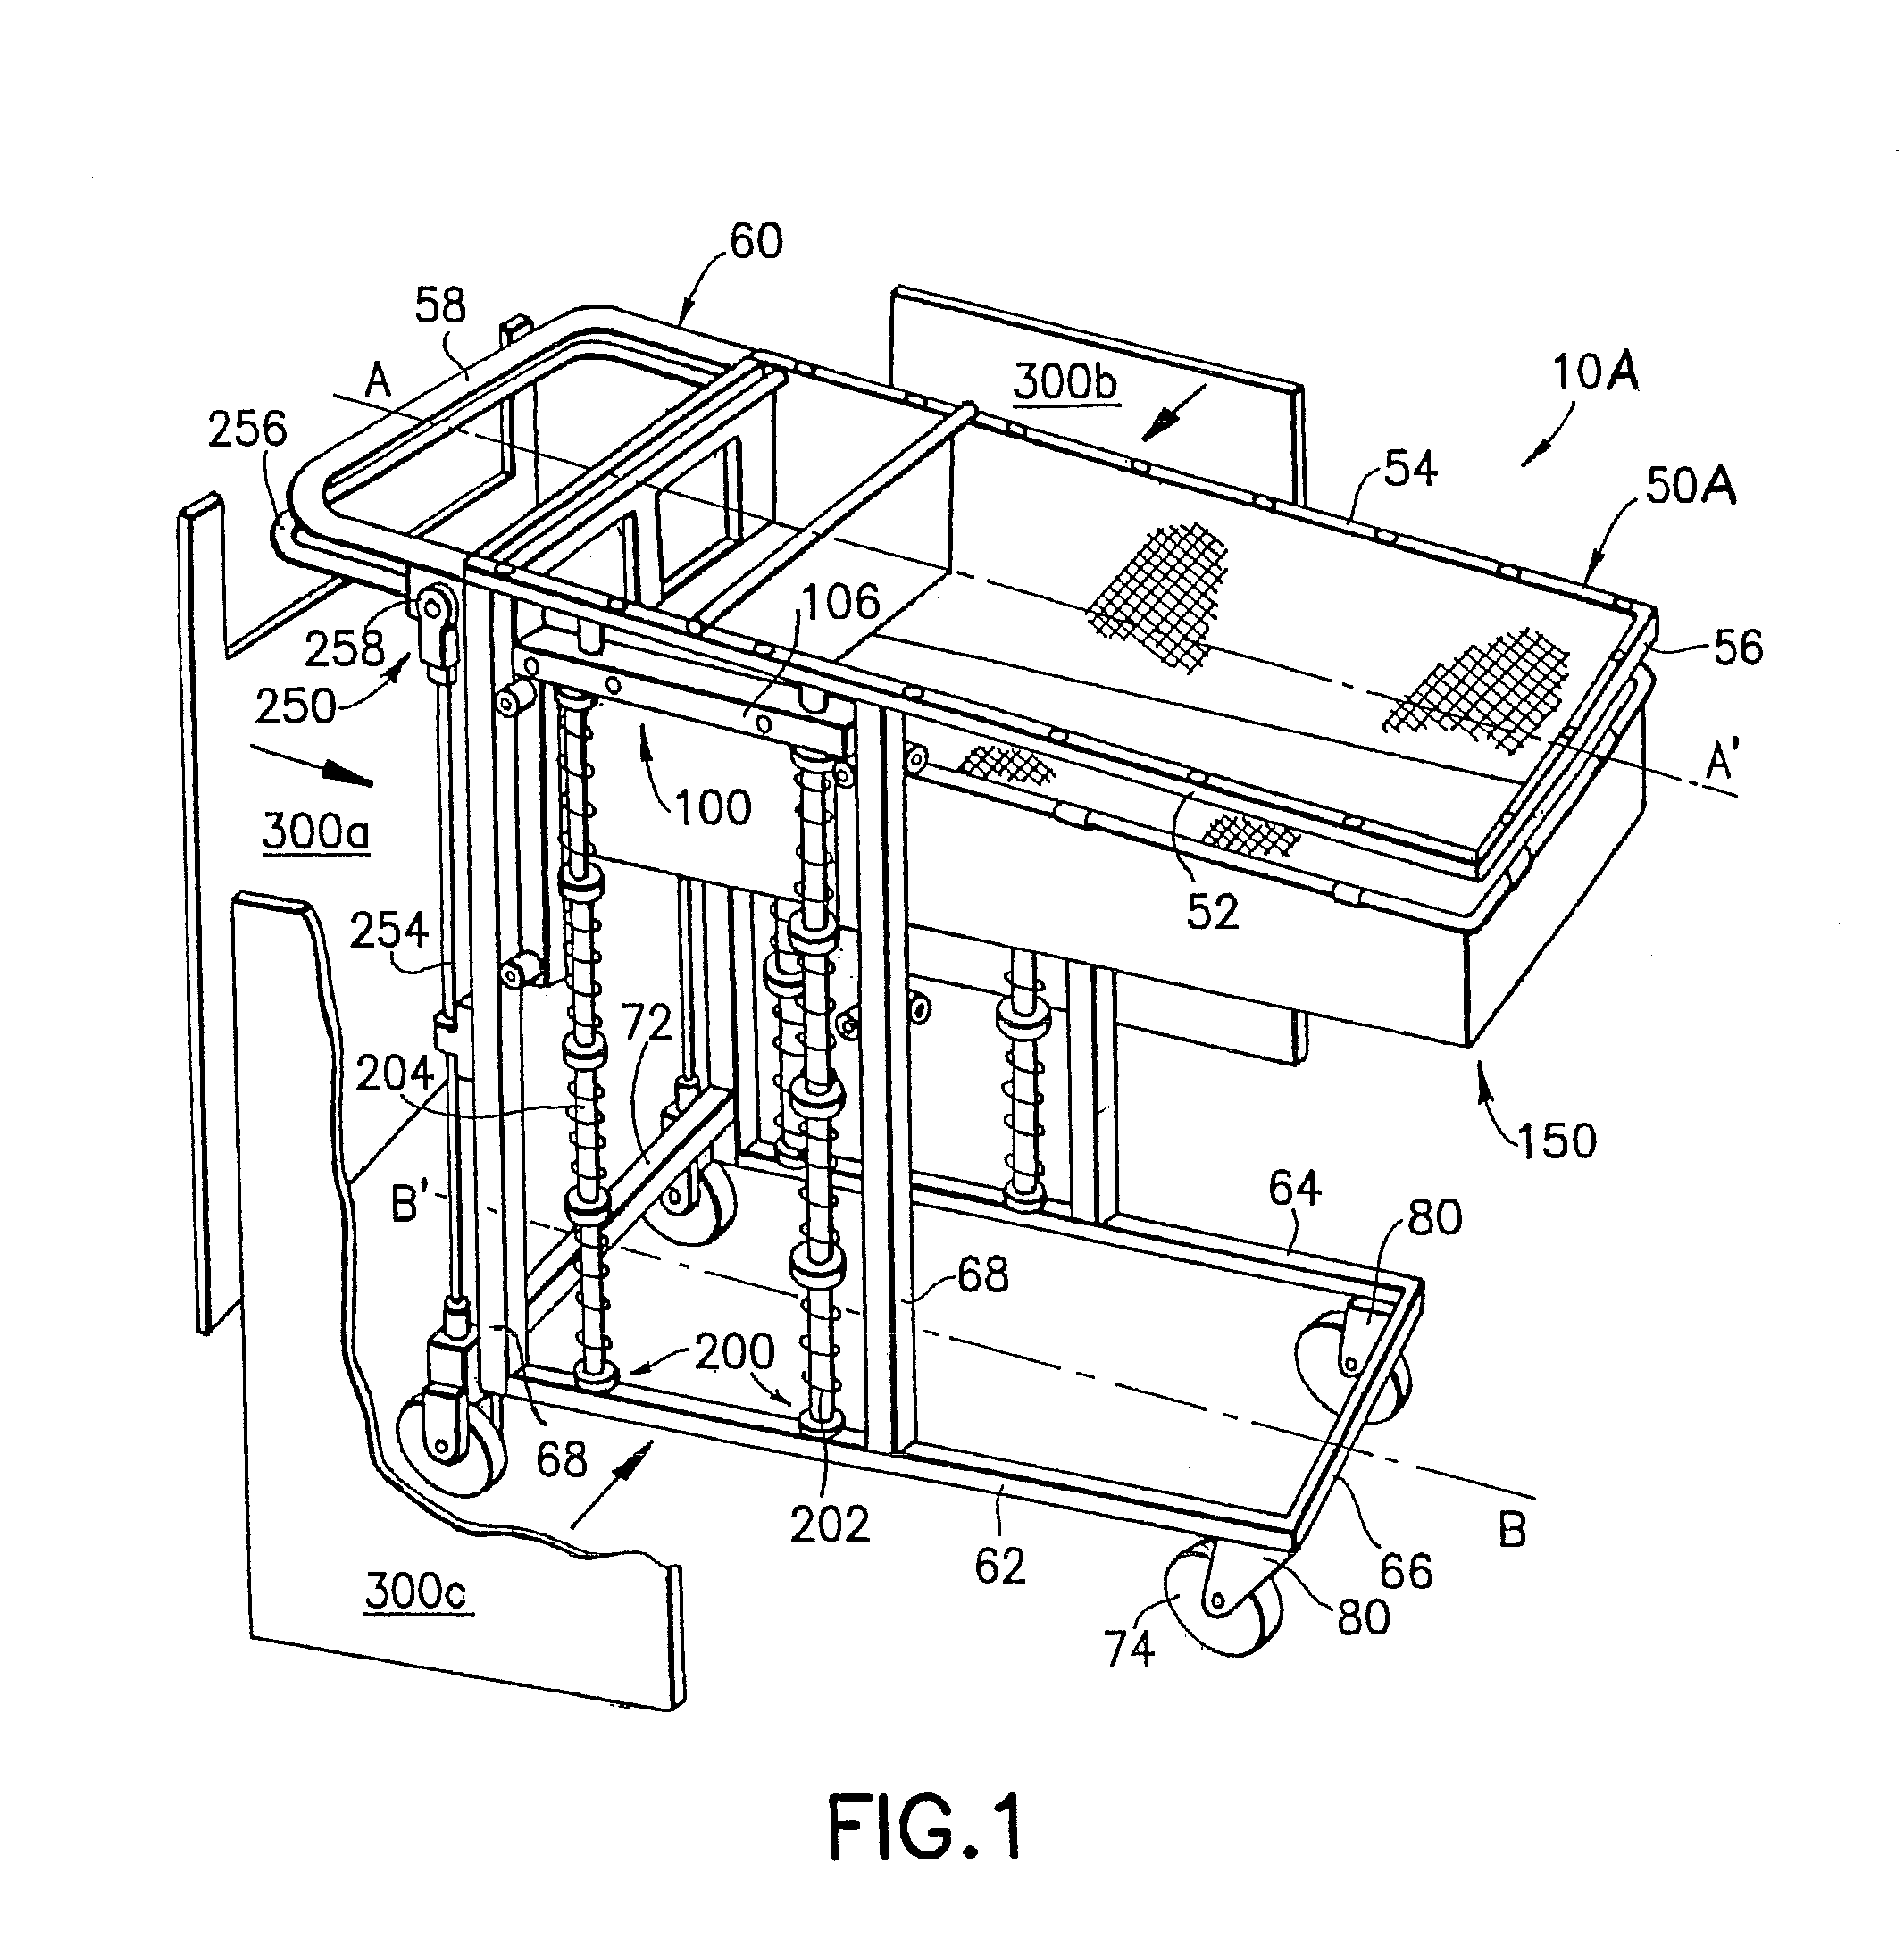 Transportation device having a basket with a movable floor